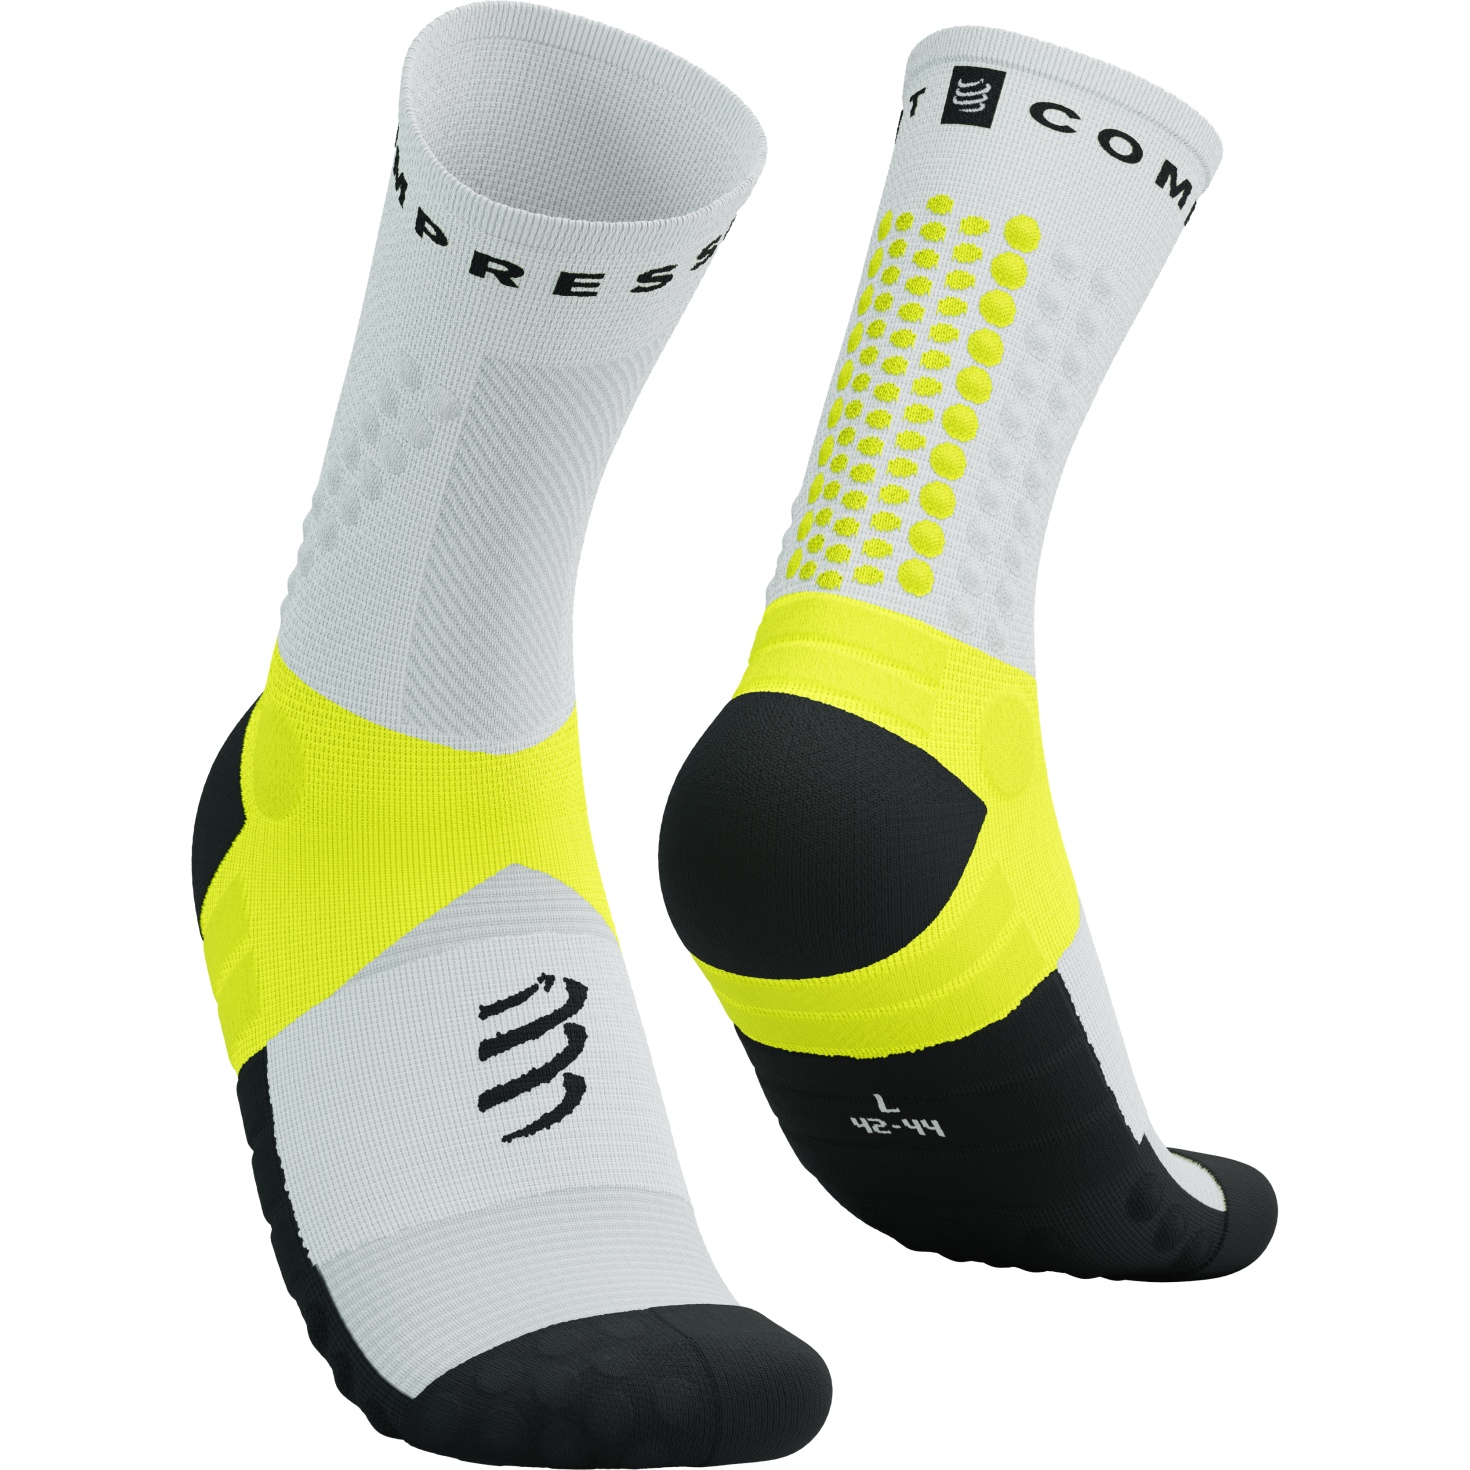 Picture of Compressport Ultra Trail Compression Socks v2.0 - white/black/safety yellow